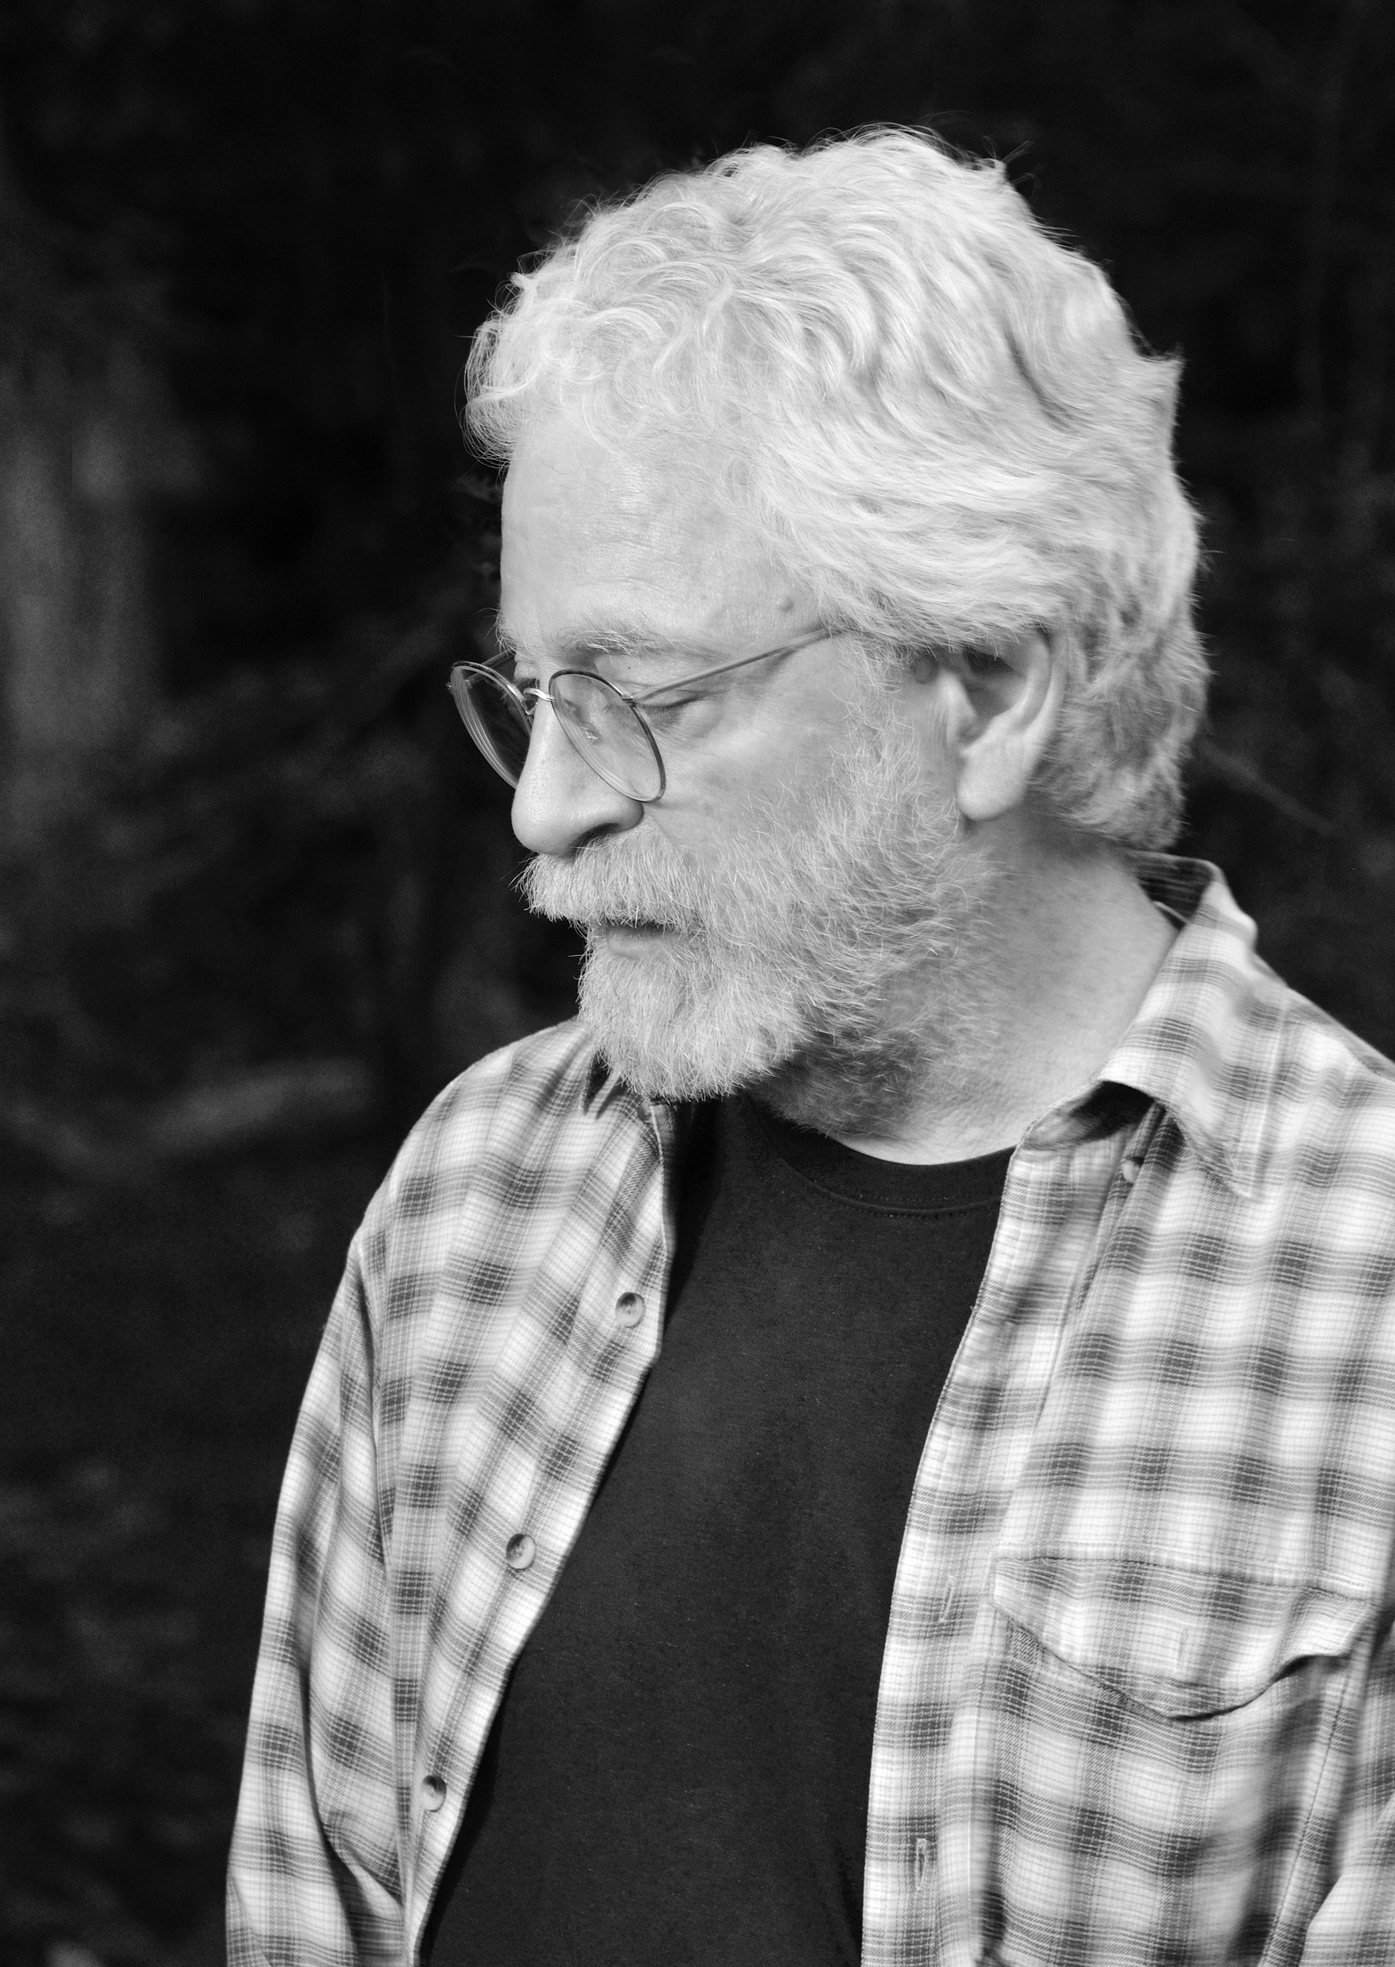 Black and white profile shot of white haired/bearded man with wire glasses in a plaid shirt gazing downward.haired 